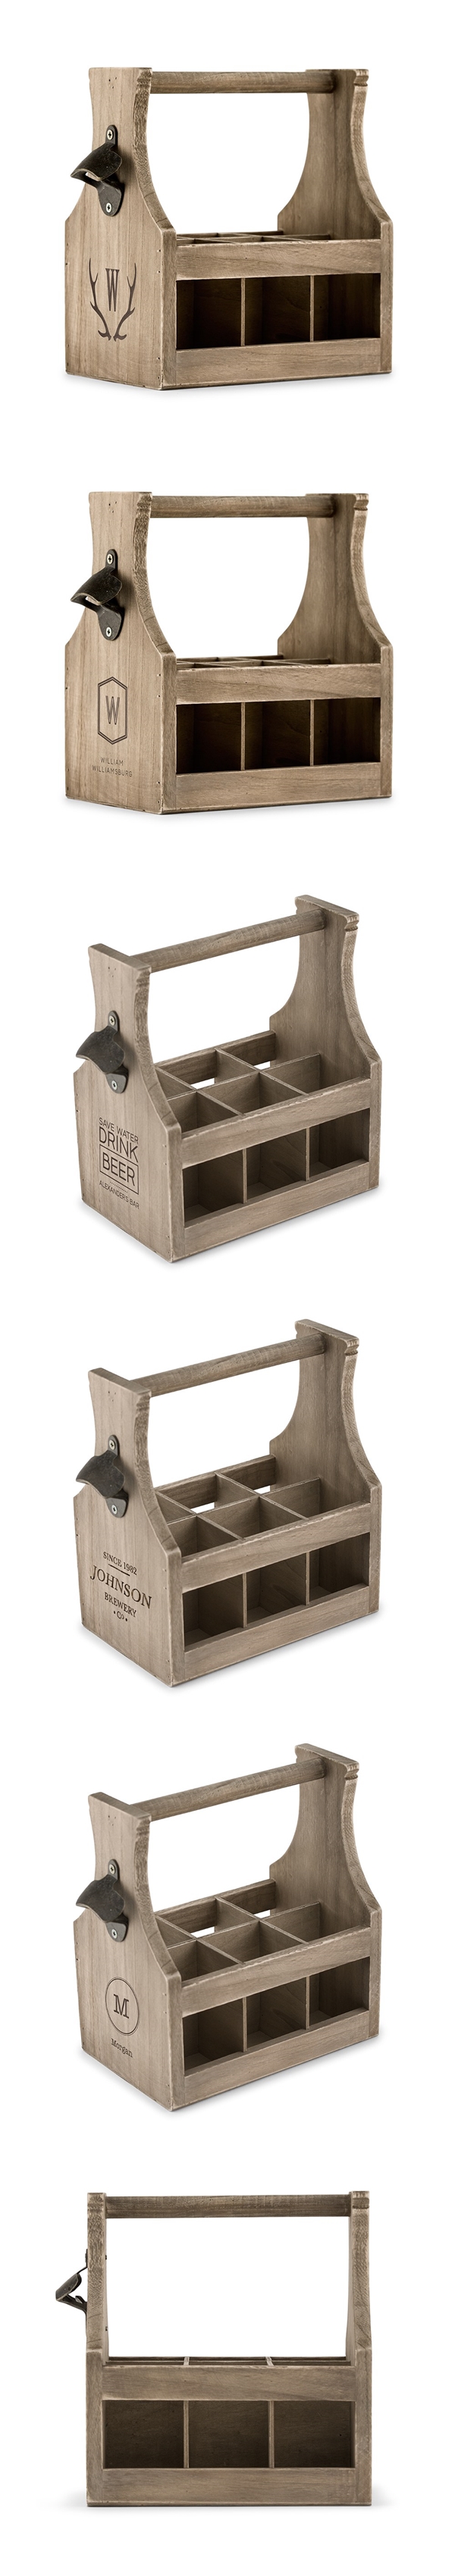 Personalizable Wood Bottle Caddy with Bottle Opener (5 Designs)